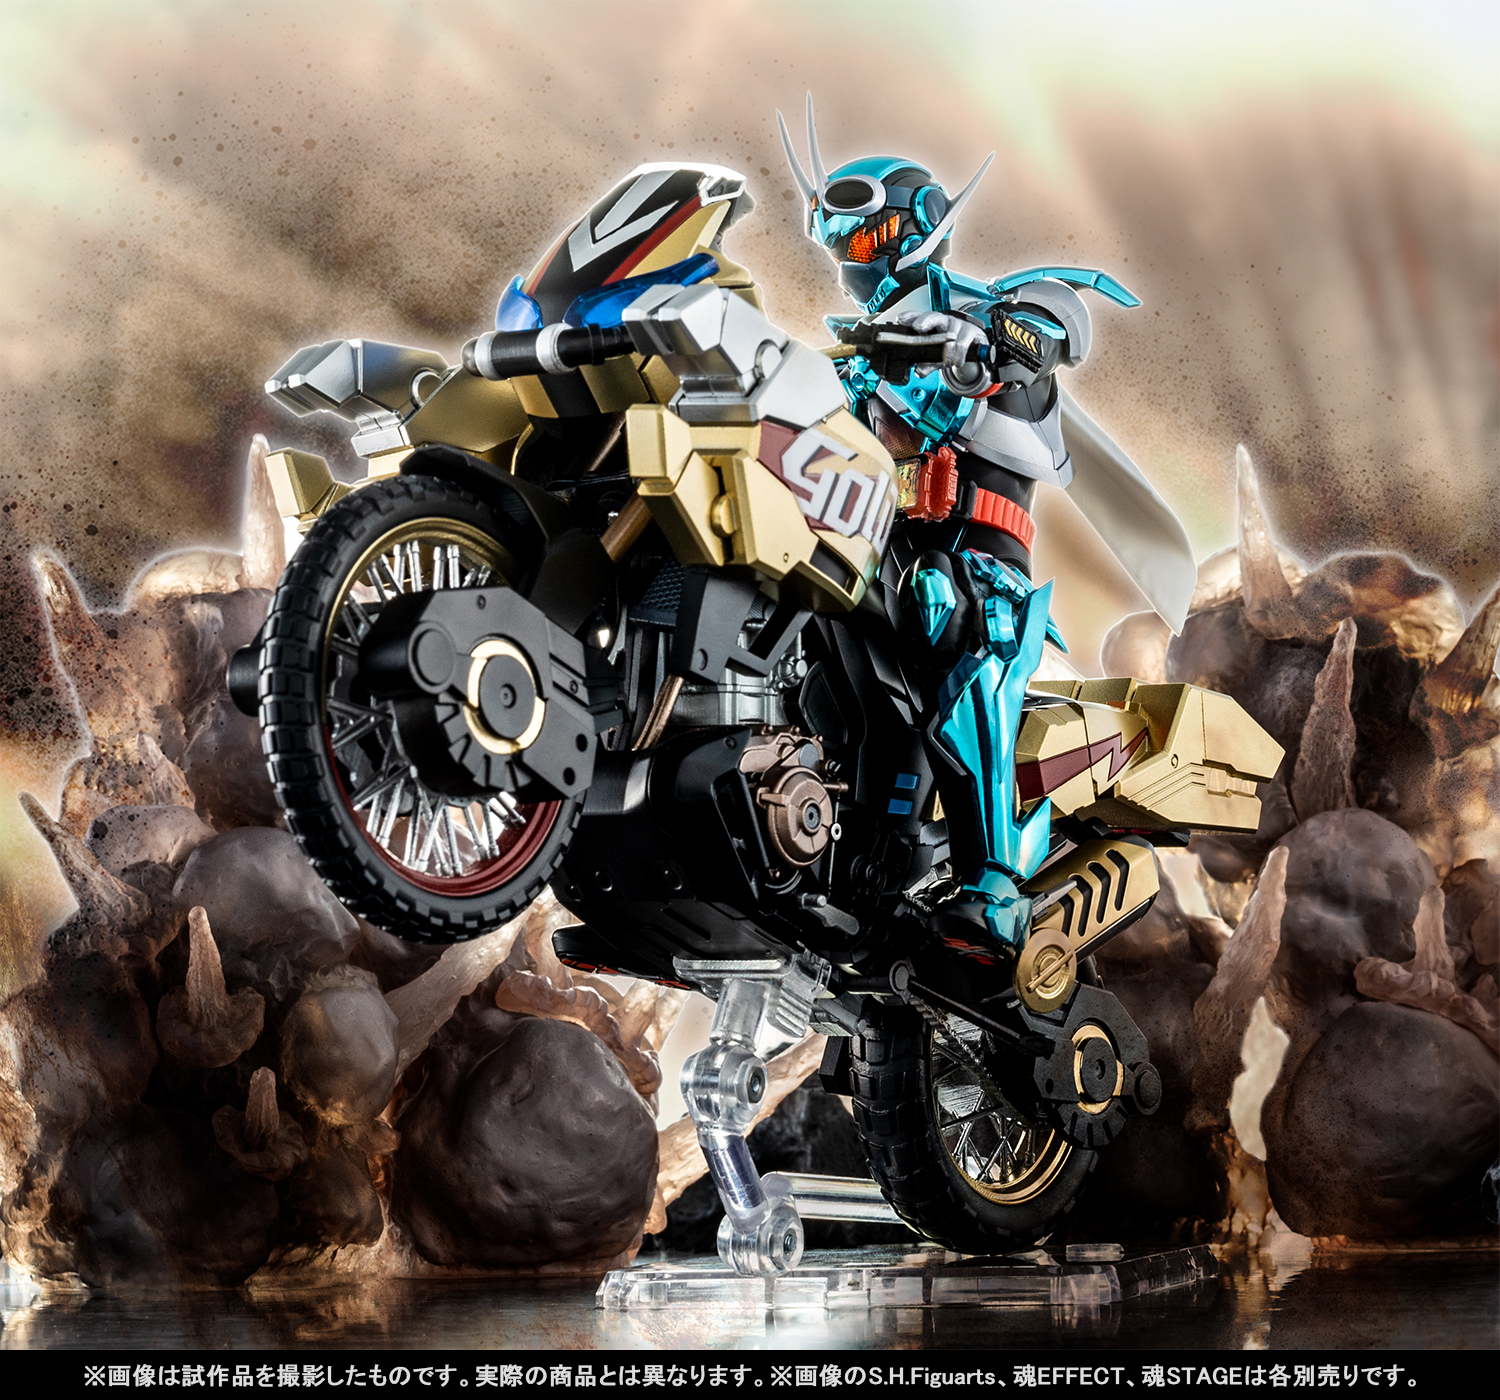 Intense shots of the latest two machines in the "Kamen Rider" series! Tamashii web shop Ordering S.H.Figuarts" GOLDDASH" and "BOOSTRIKER" Introduction of the new shots!